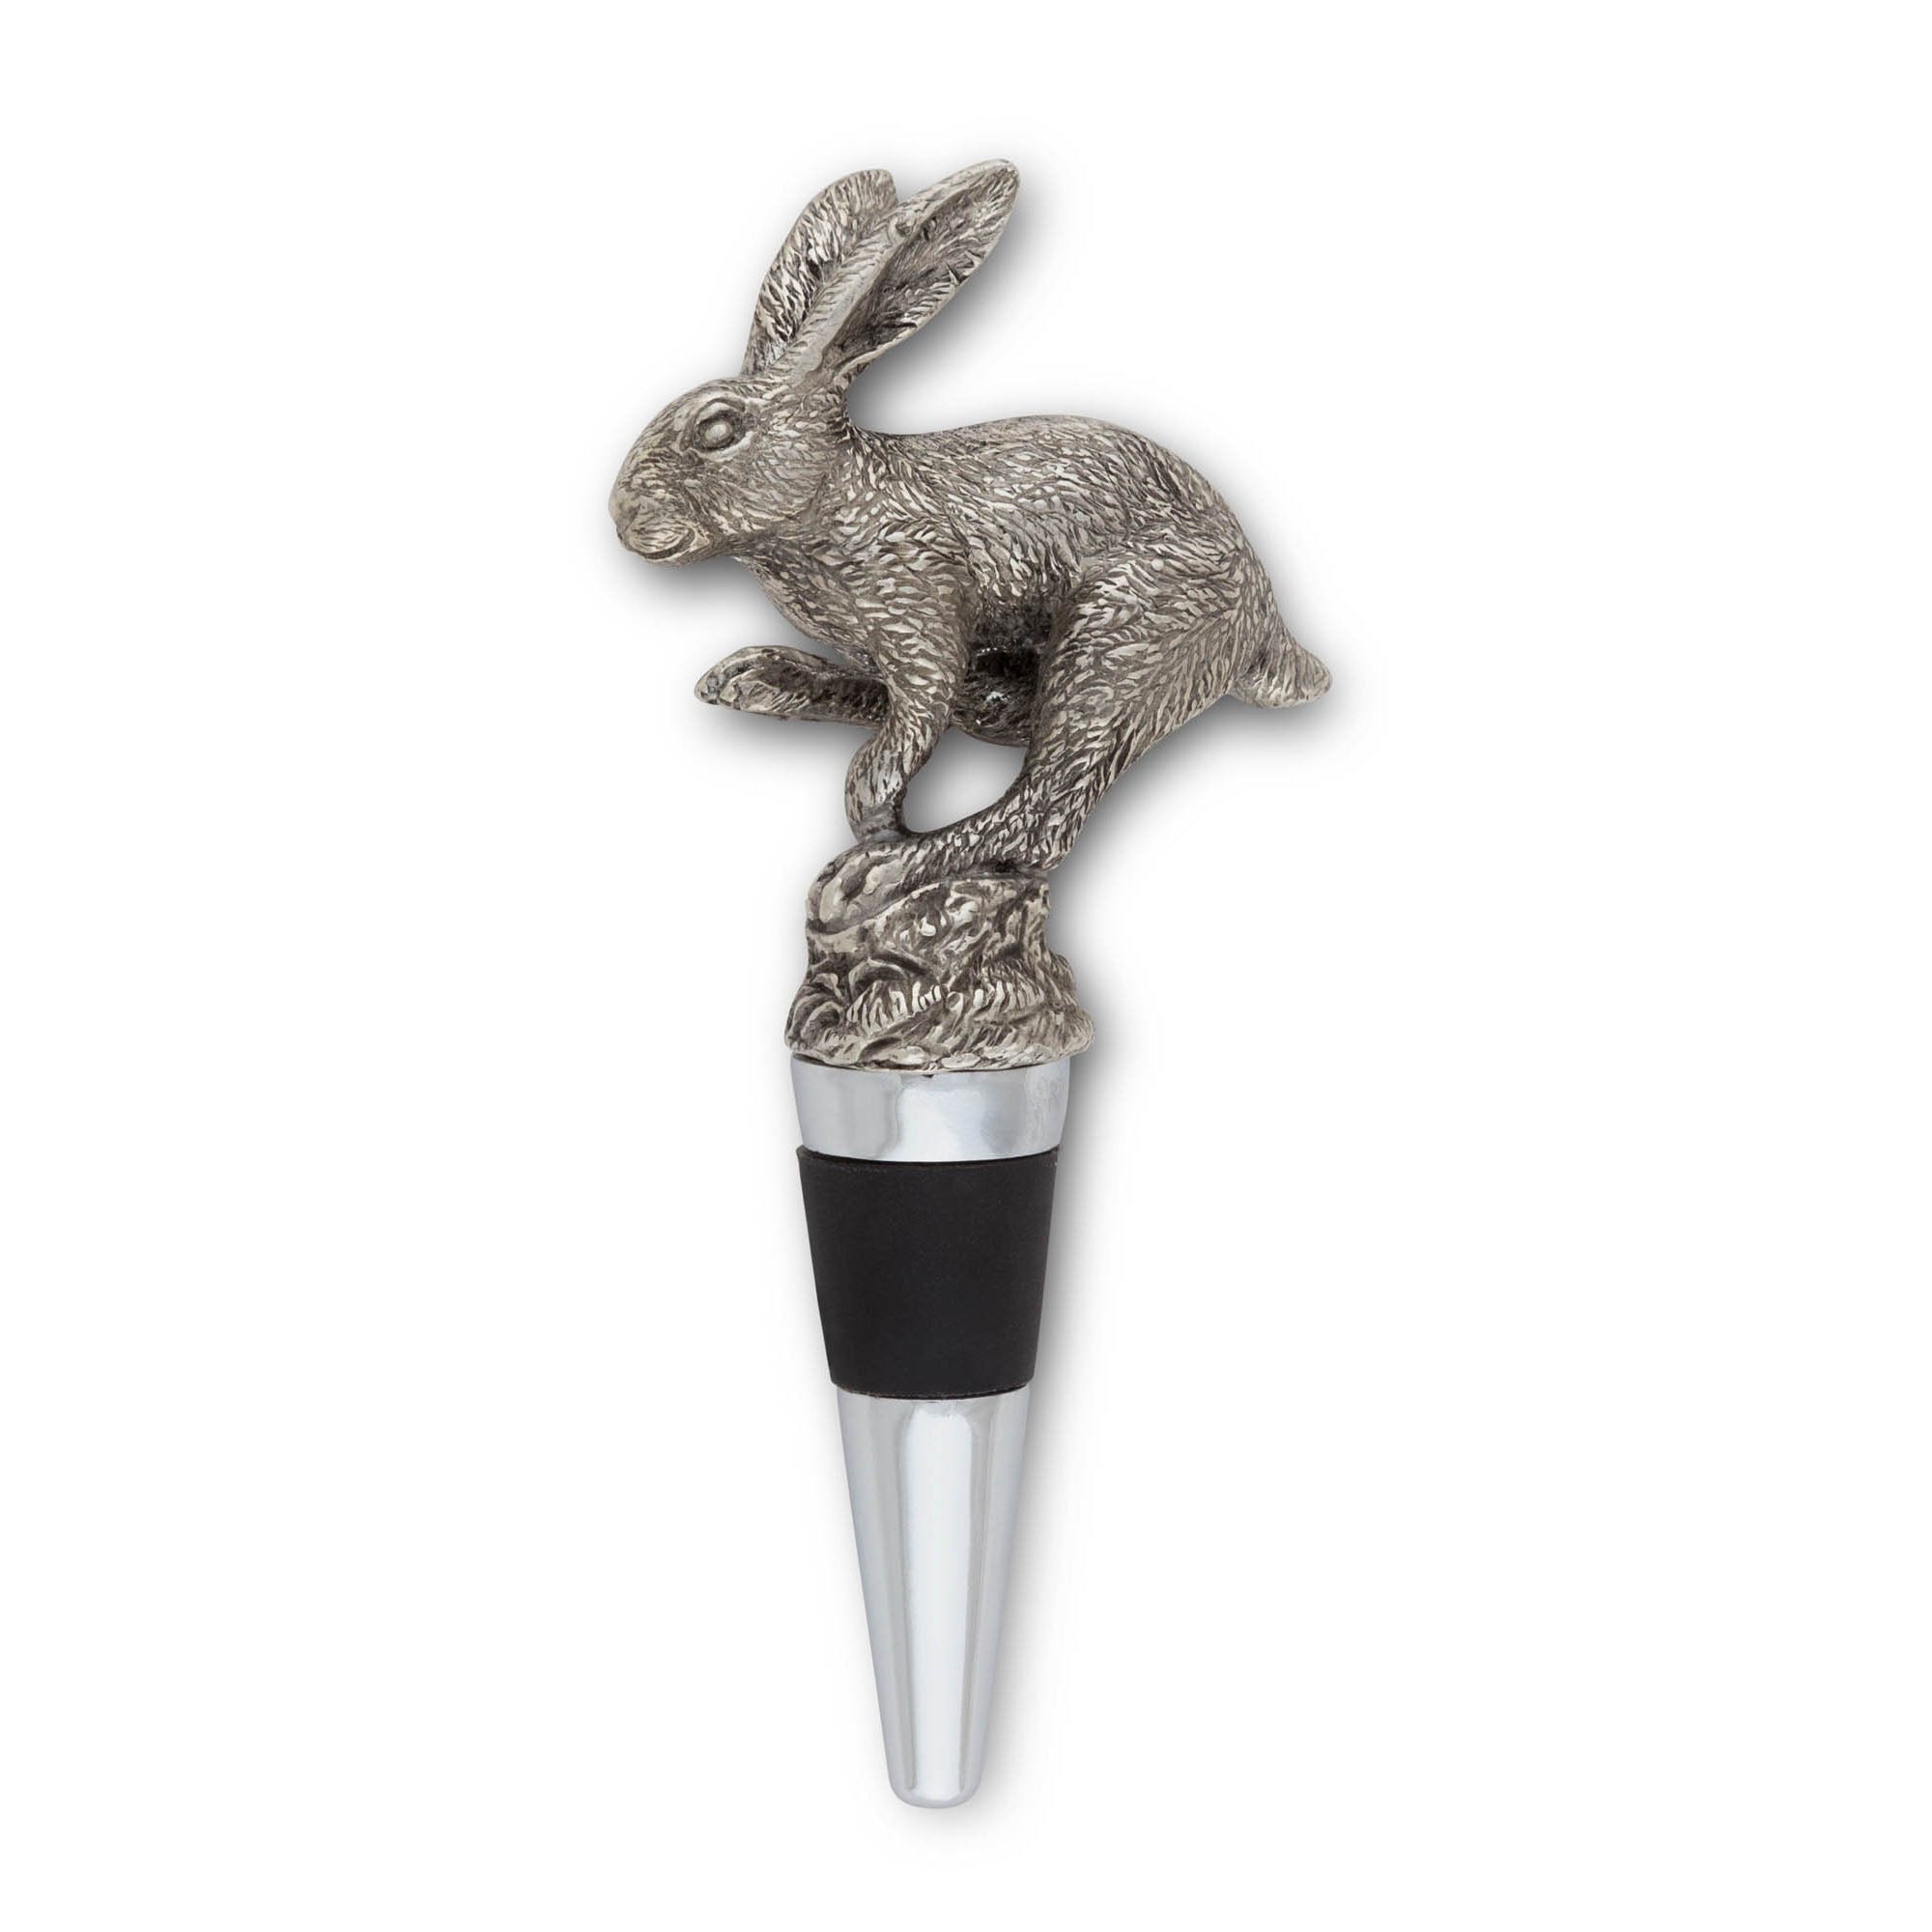 Vagabond House Pewter Jumping Hare Bottle Stopper Product Image